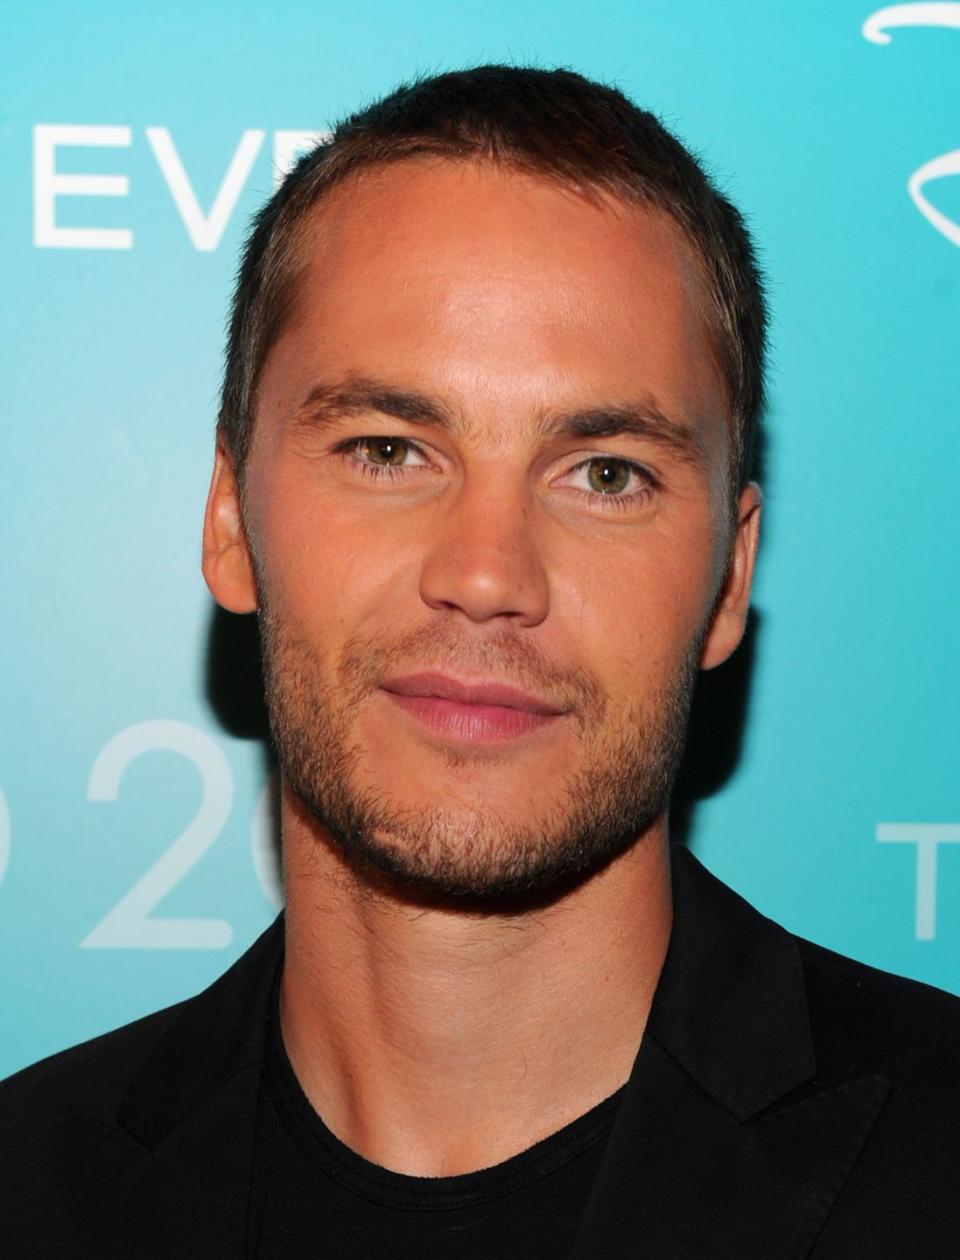 After: Taylor Kitsch